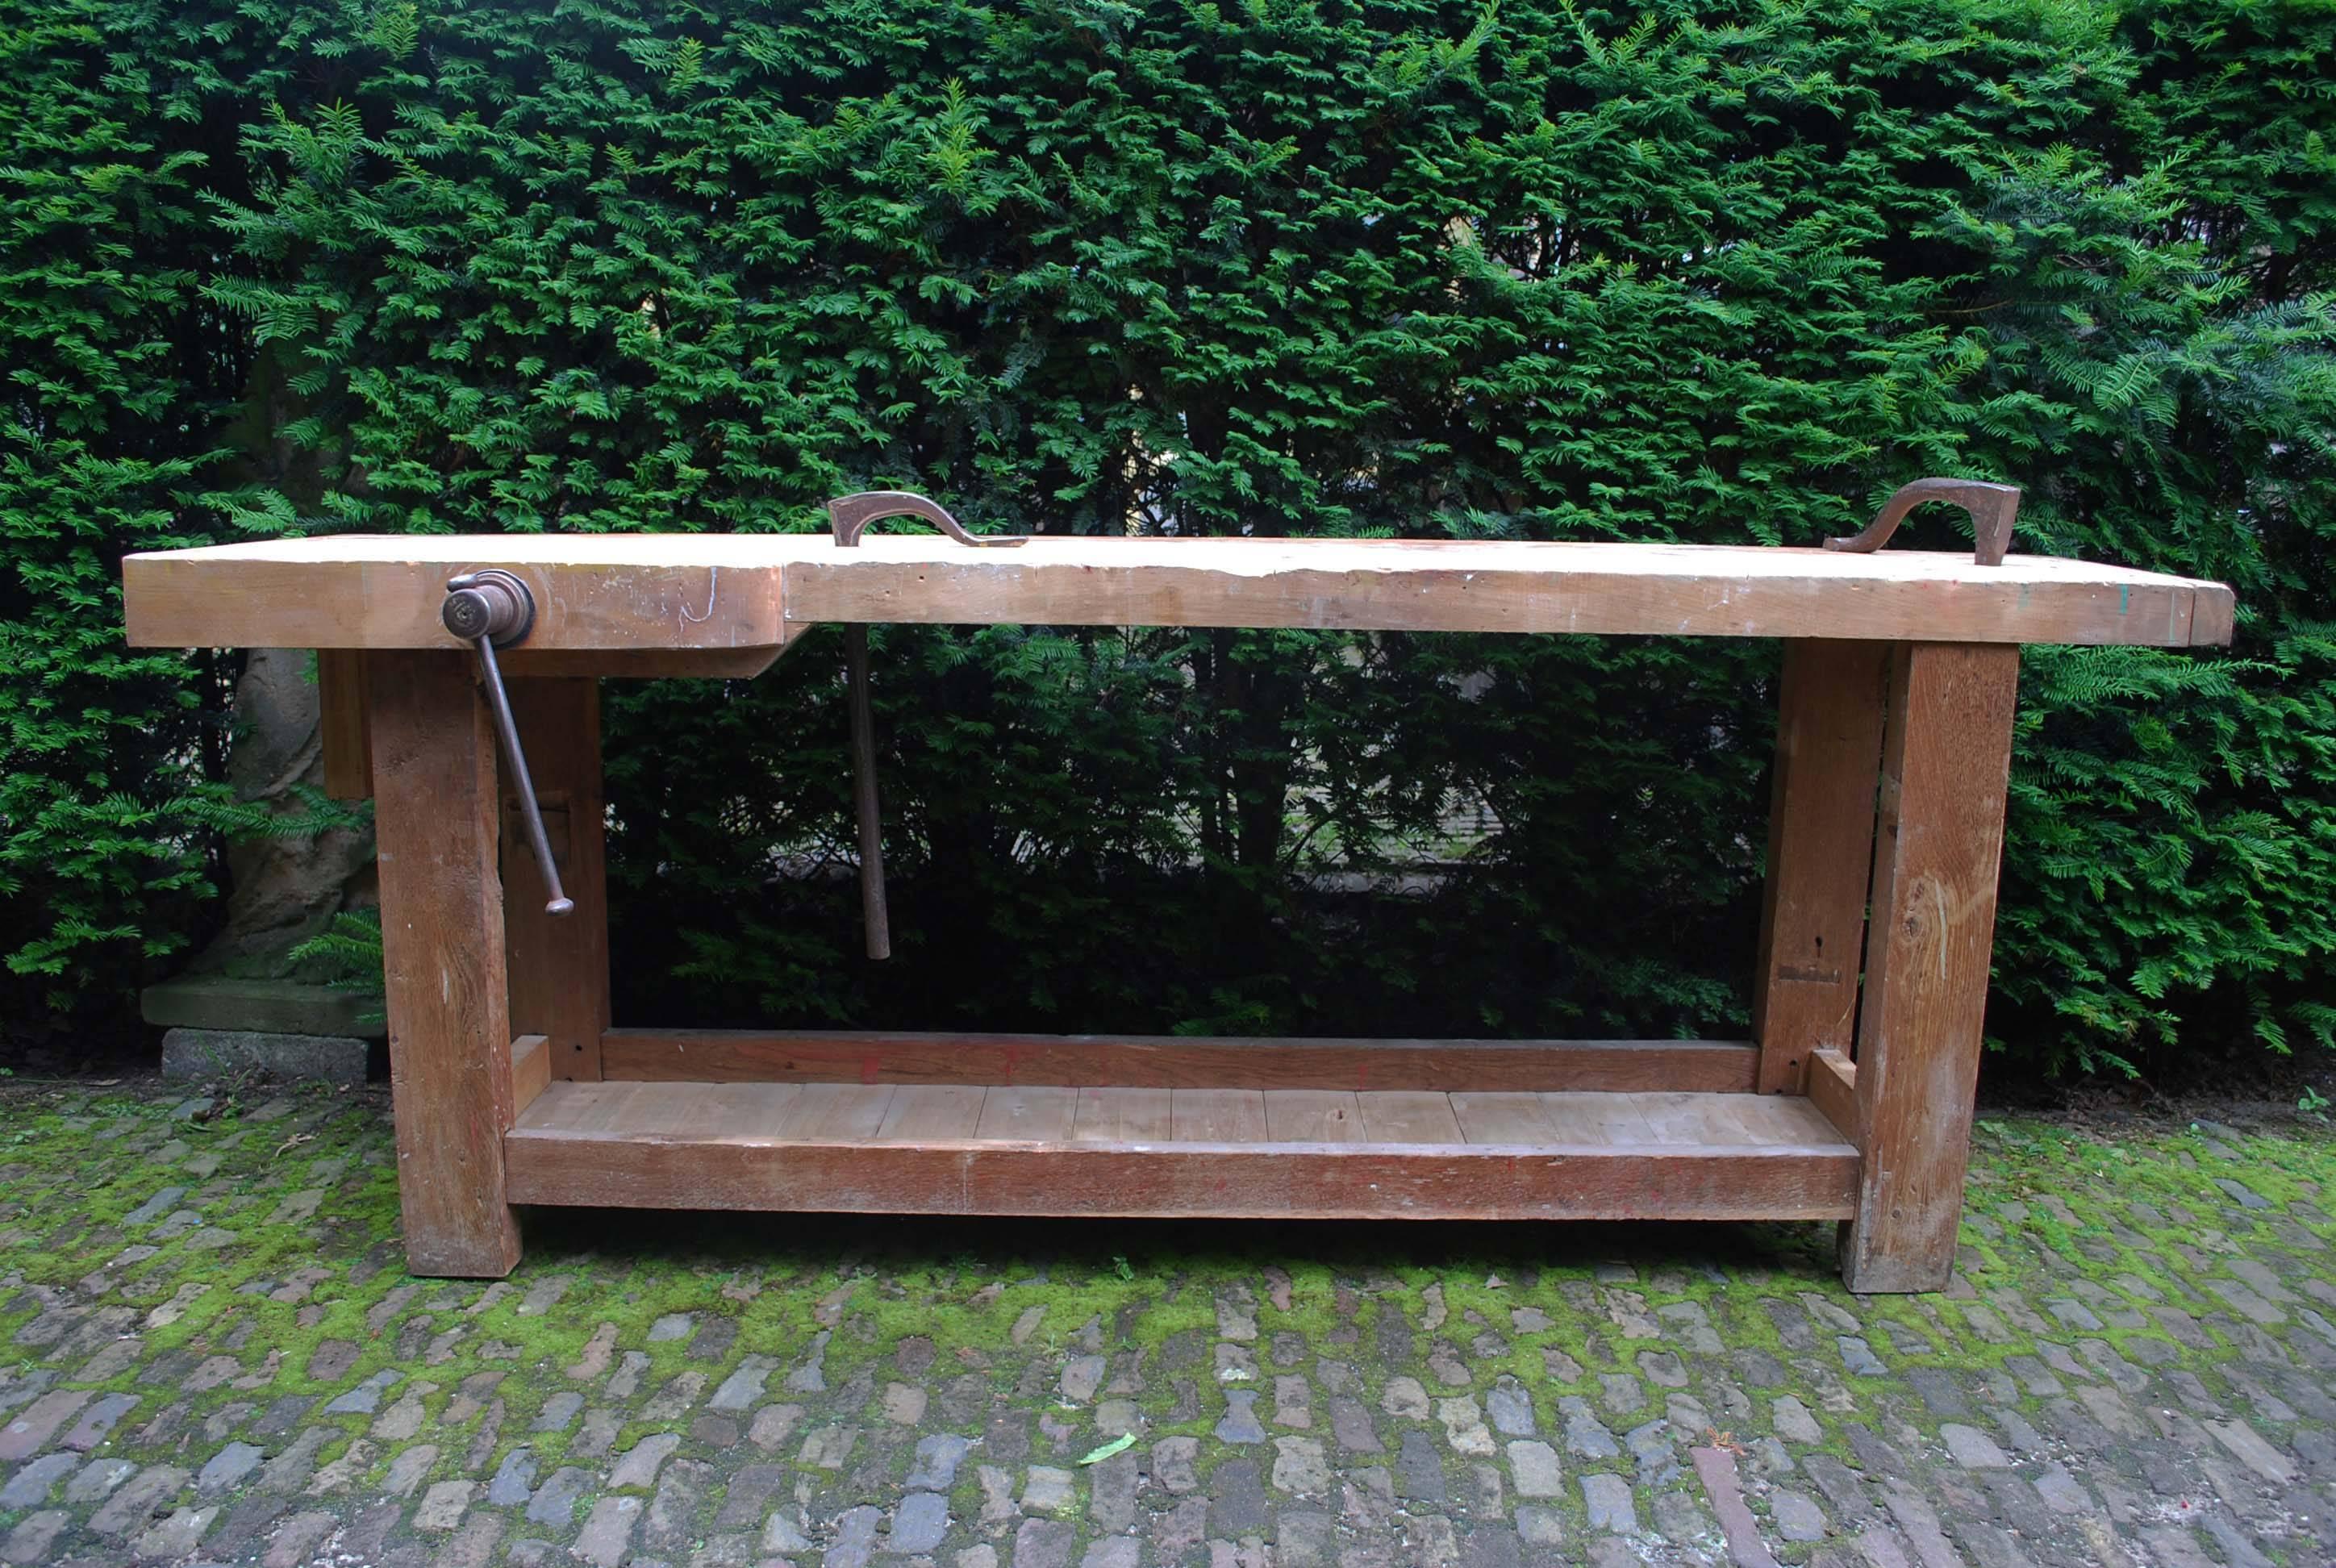 20th century Dutch carpenters workbench made from beechwood.
Originates Holland, dating, circa 1920.
(shipping costs on request, depends on destination.)